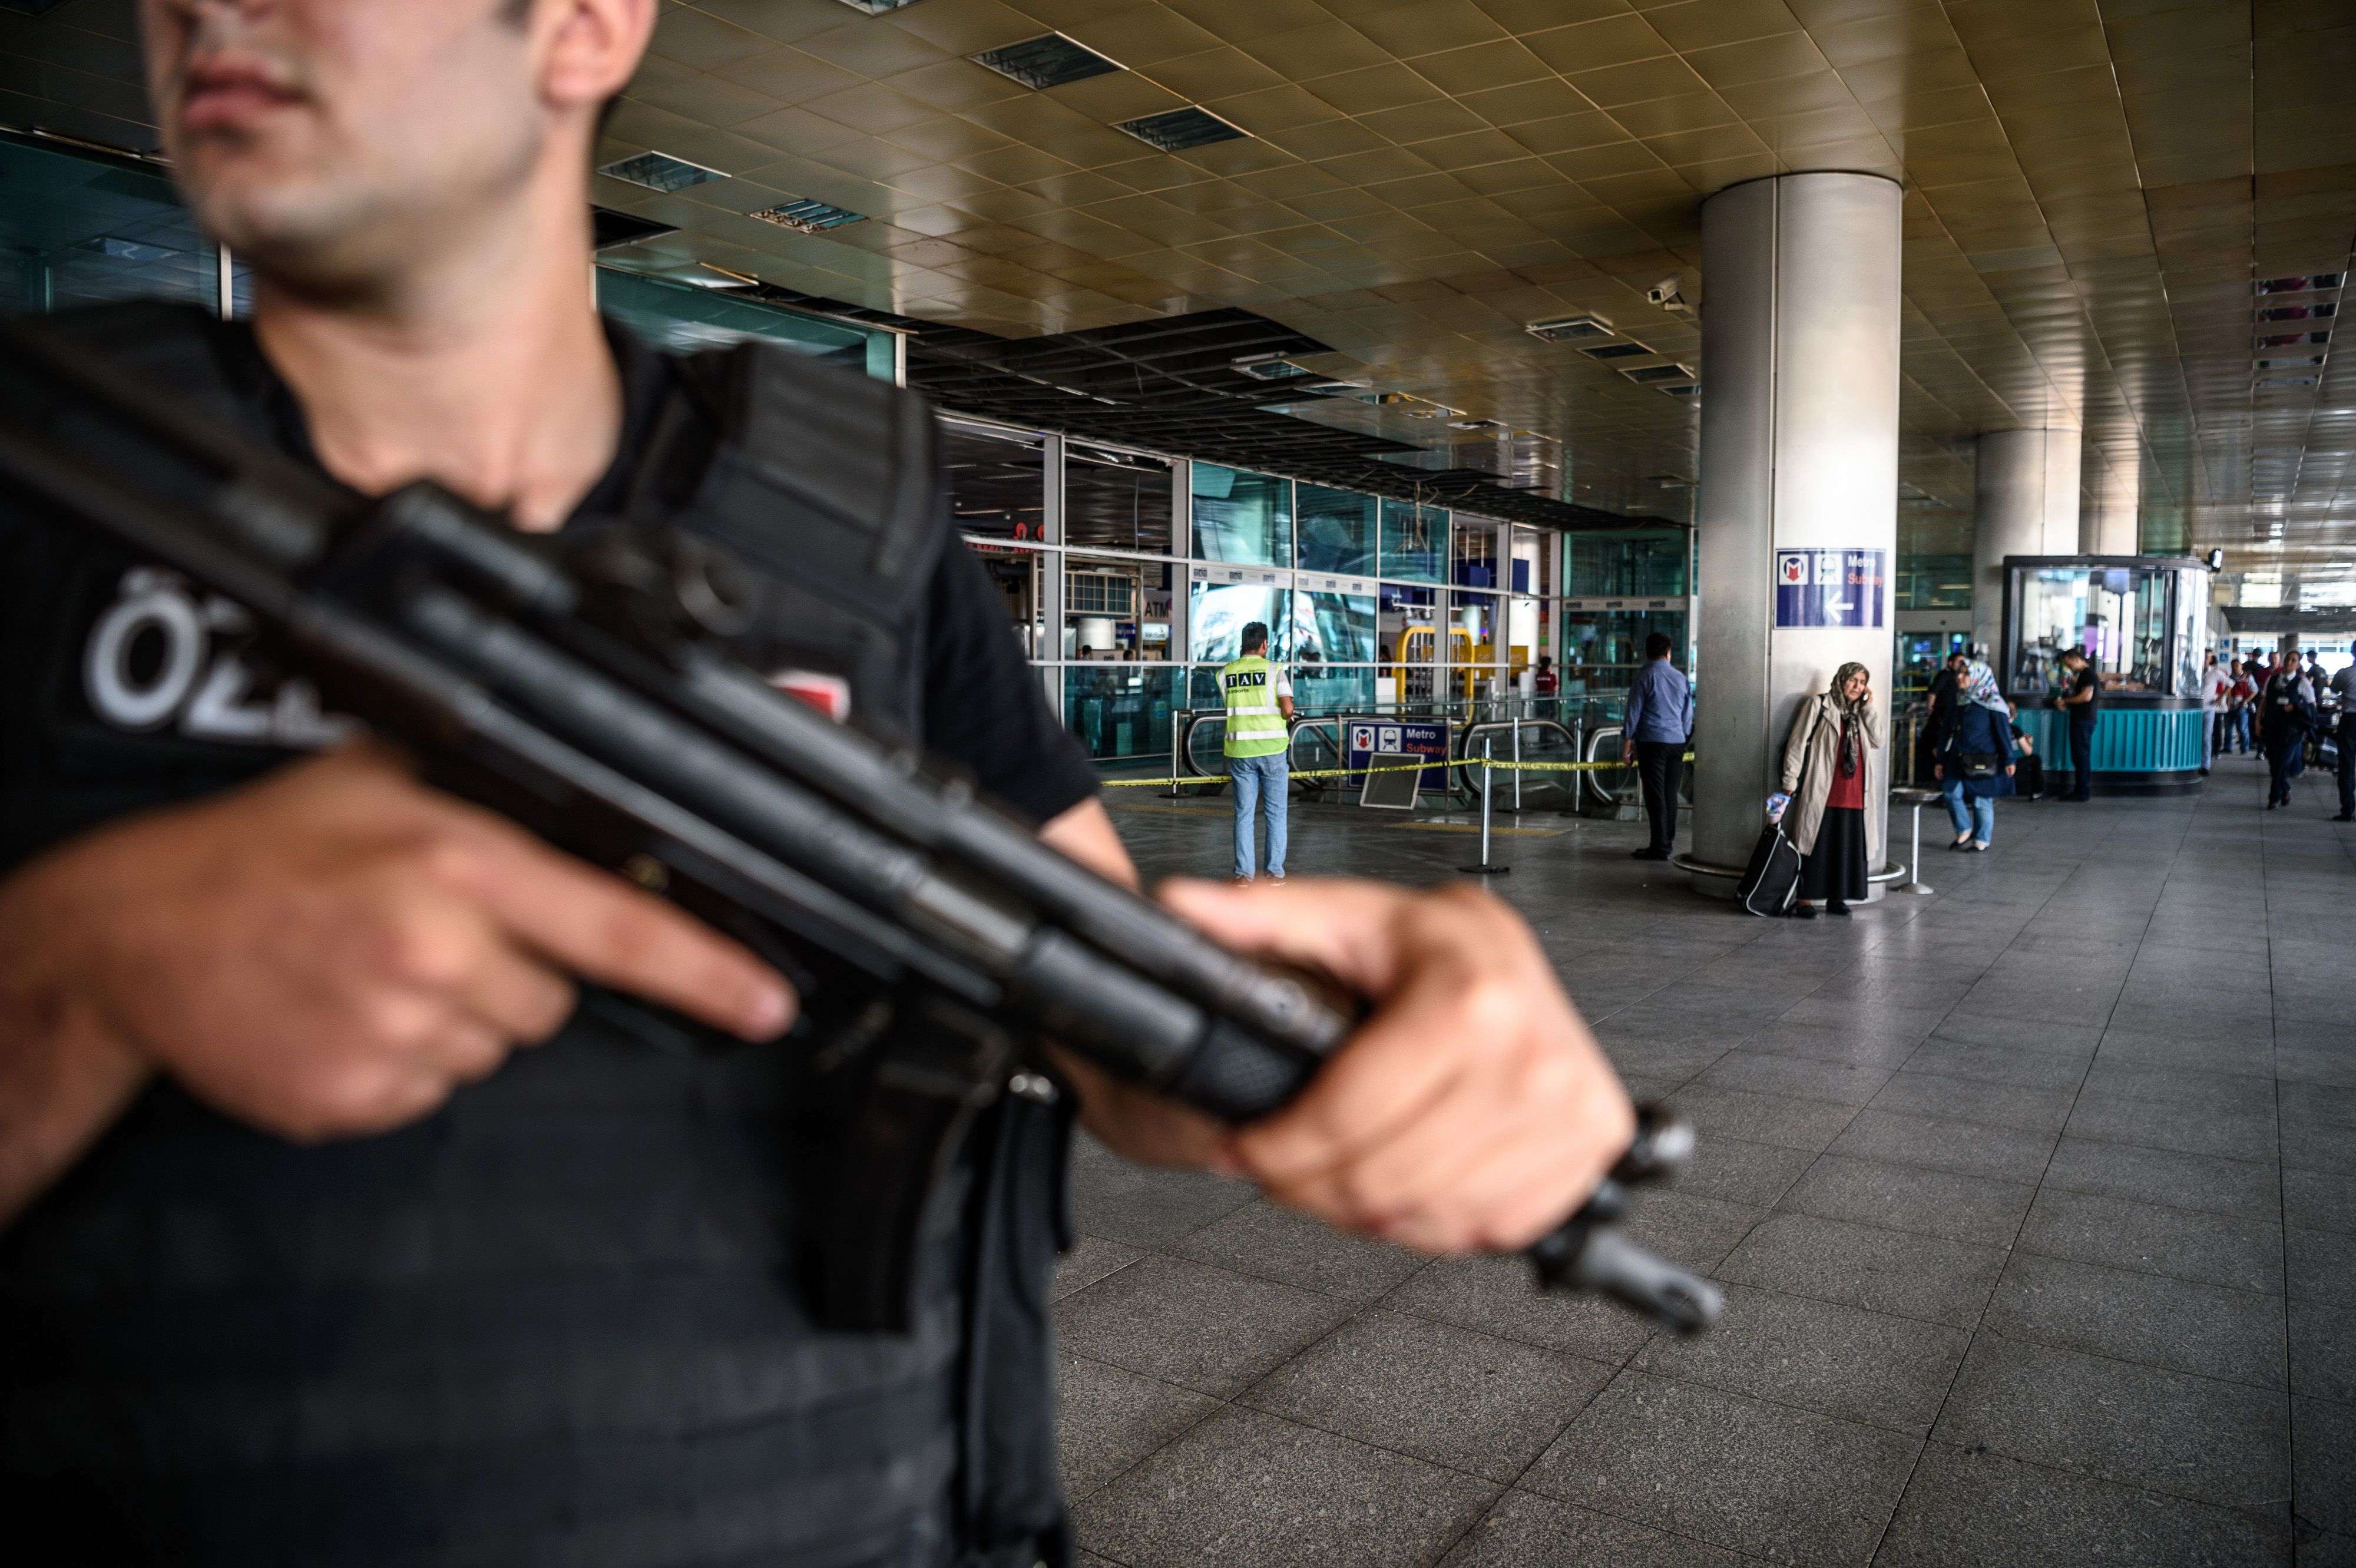 A Turkish anti-riot police officer stands guard at Ataturk airport’s international arrival terminal in Istanbul, a day after a suicide bombing and gun attack killed at least 41 people. Photo: AFP